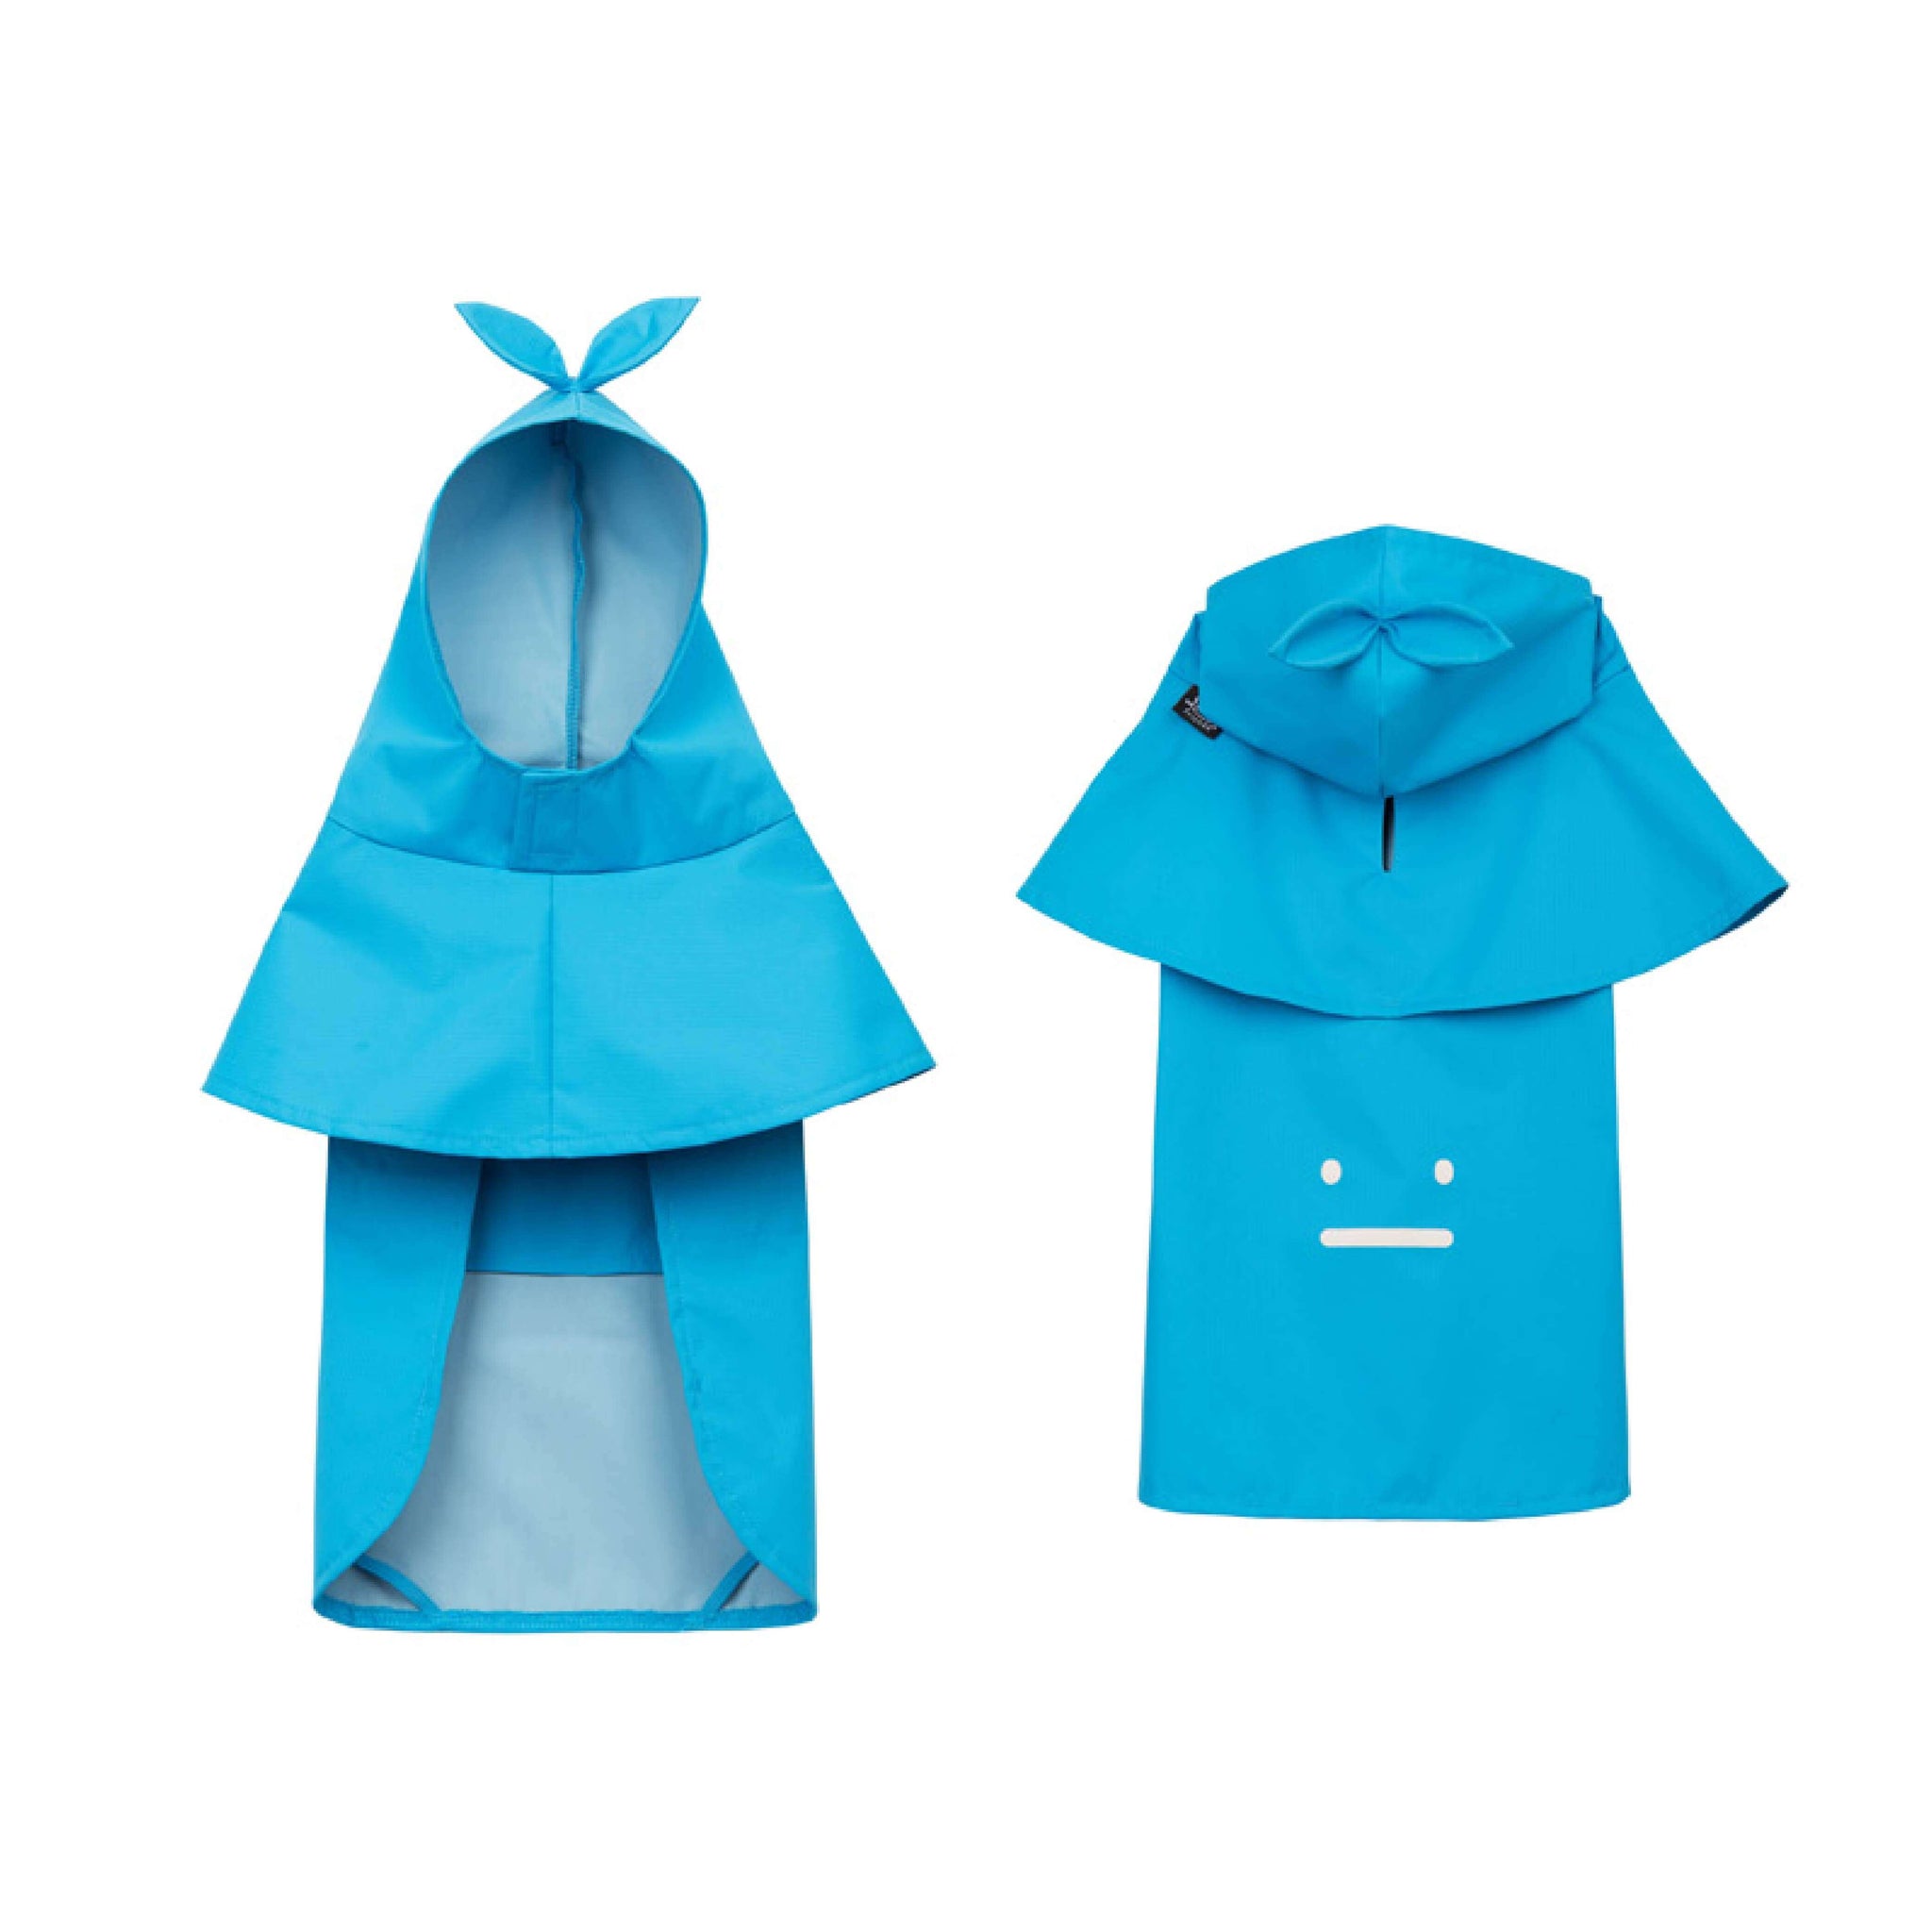 Raincoat for walking on a rainy day.